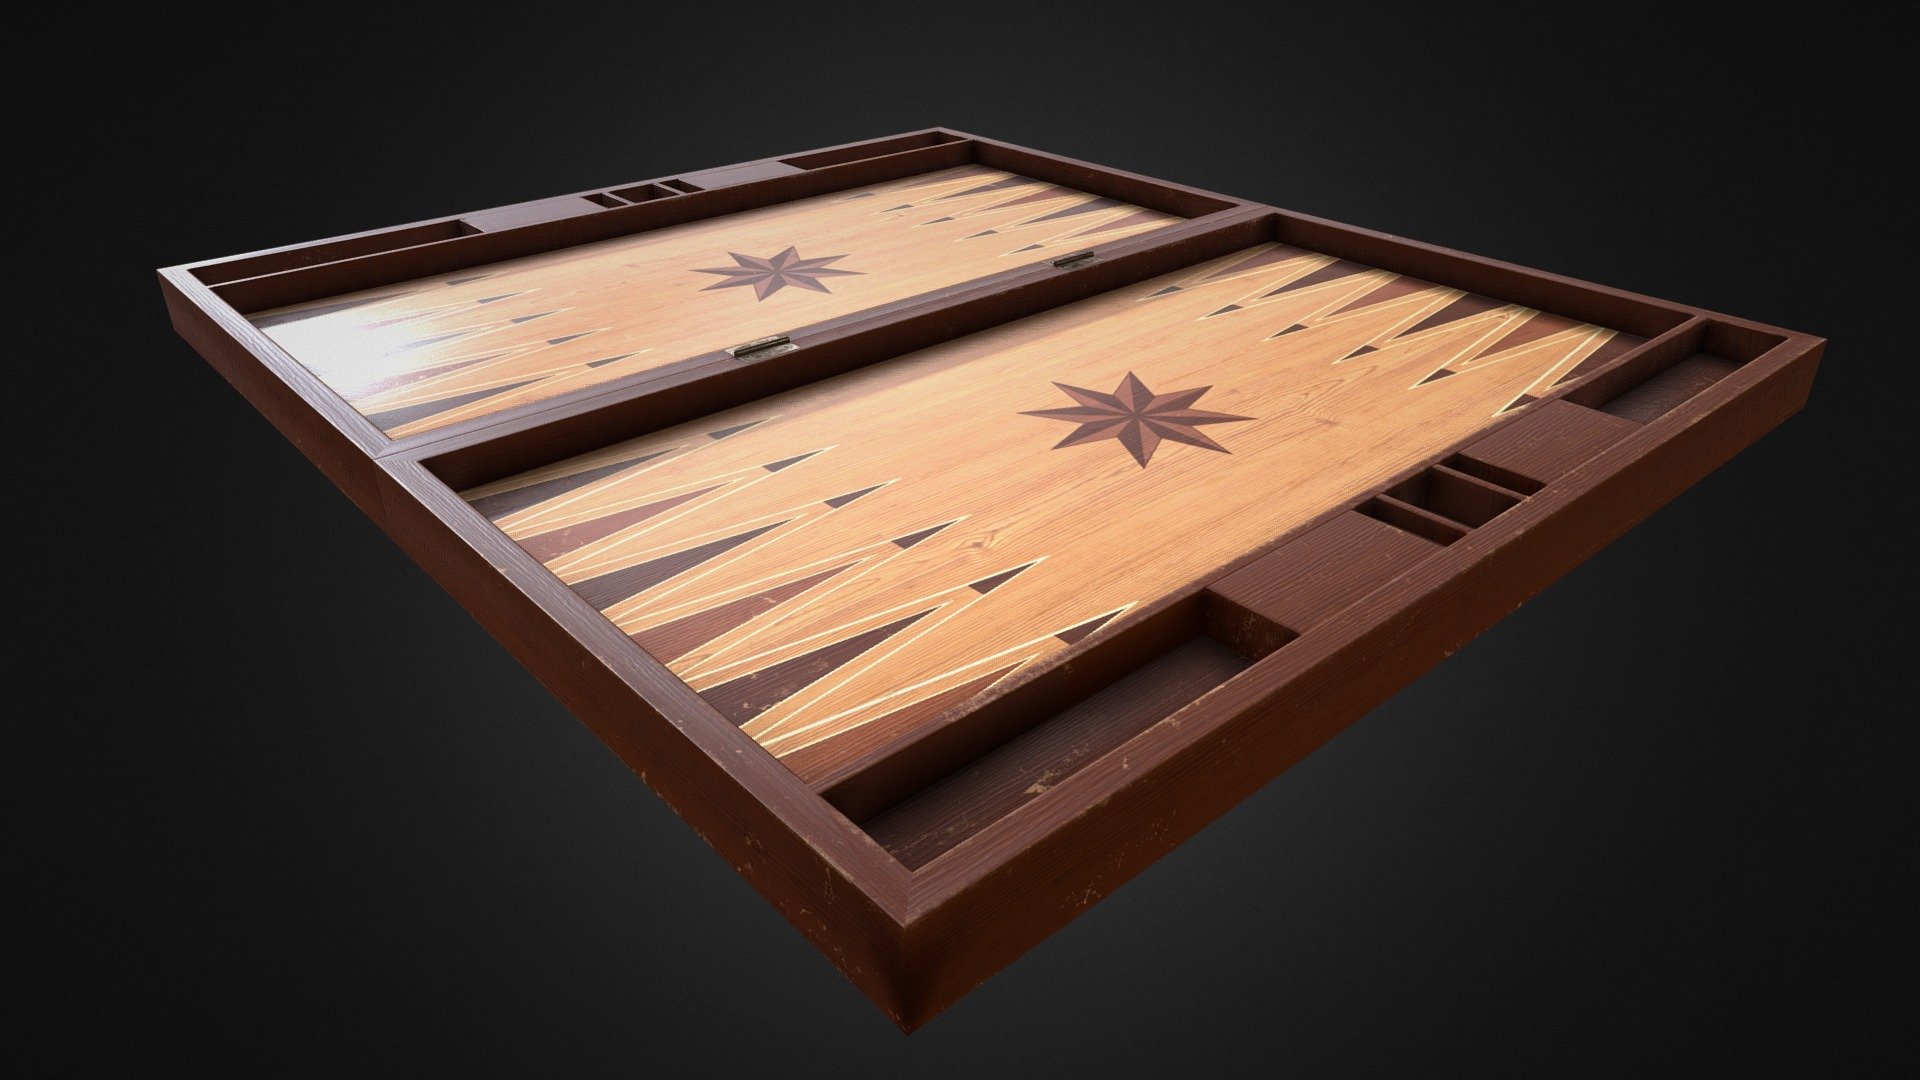 A backgammon board I designed for a contract job on CG Trader 3d model